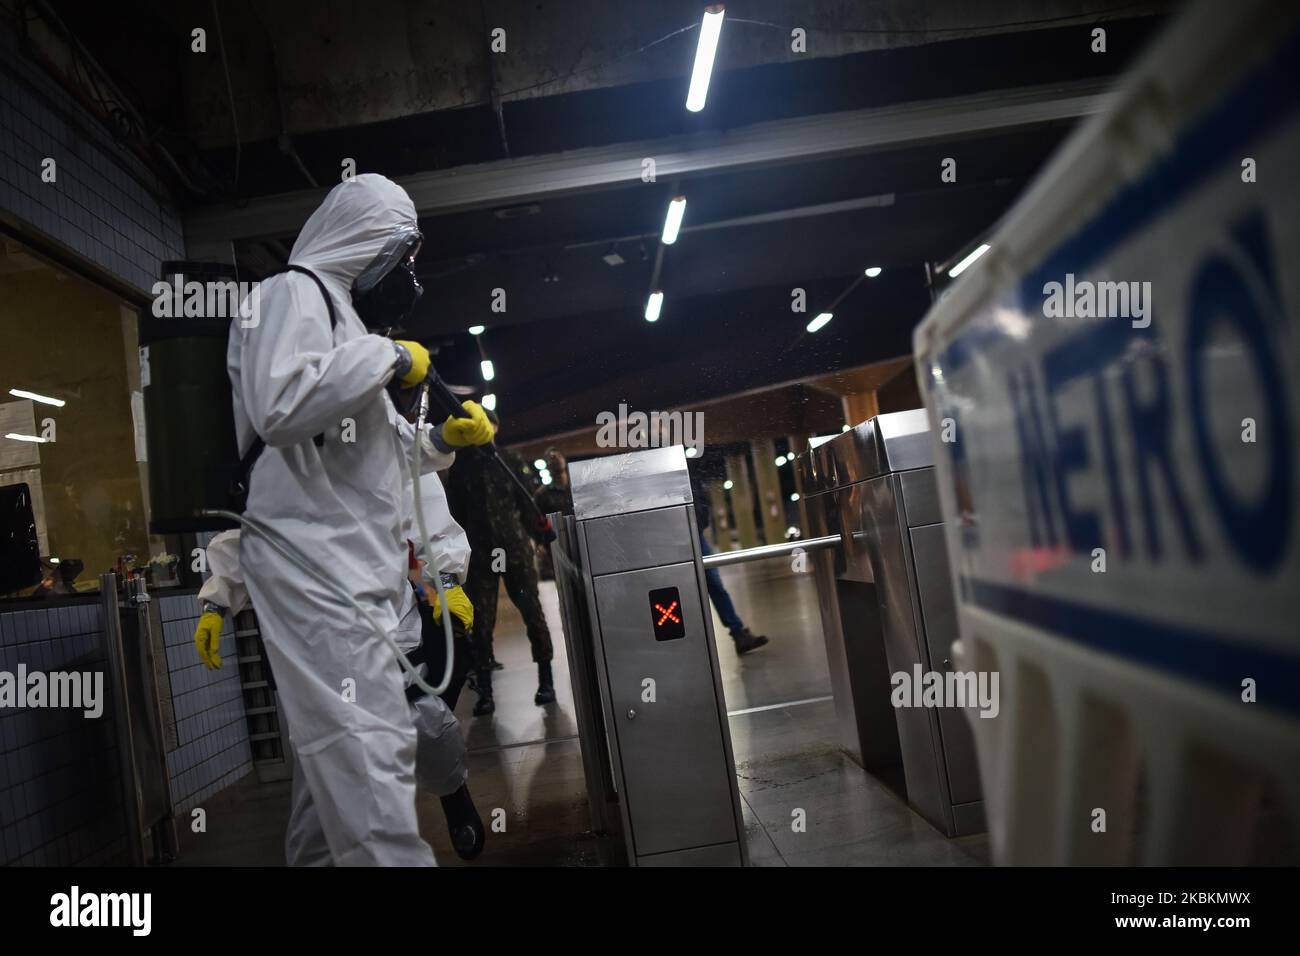 Military soldiers from the Brazilian Army's Chemical, Biological, Radiological and Nuclear Defense Company work on the disinfection of the Central Subway Station in Brasília, Brazil, on March 28, 2020. Decontamination actions in places with high passenger traffic are part of the prevention and fight against the Coronavirus (COVID-19). (Photo by Andre Borges/NurPhoto) Stock Photo